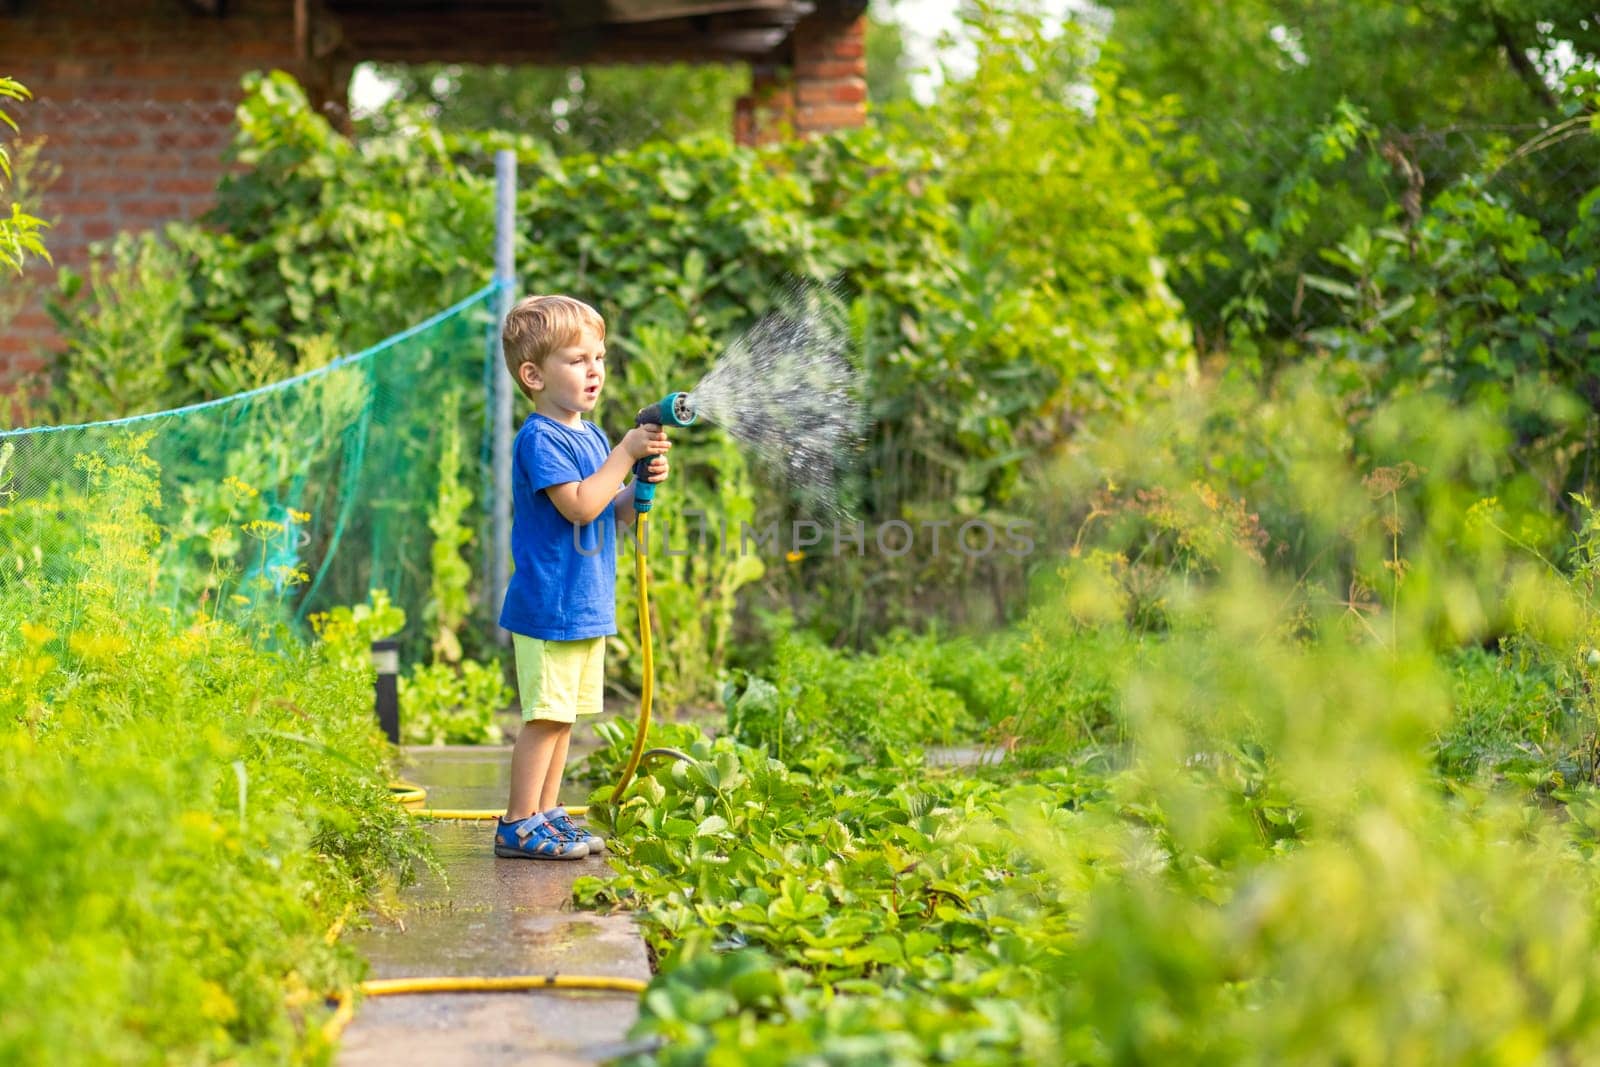 Young Boy Watering Garden Plants with Hose by andreyz